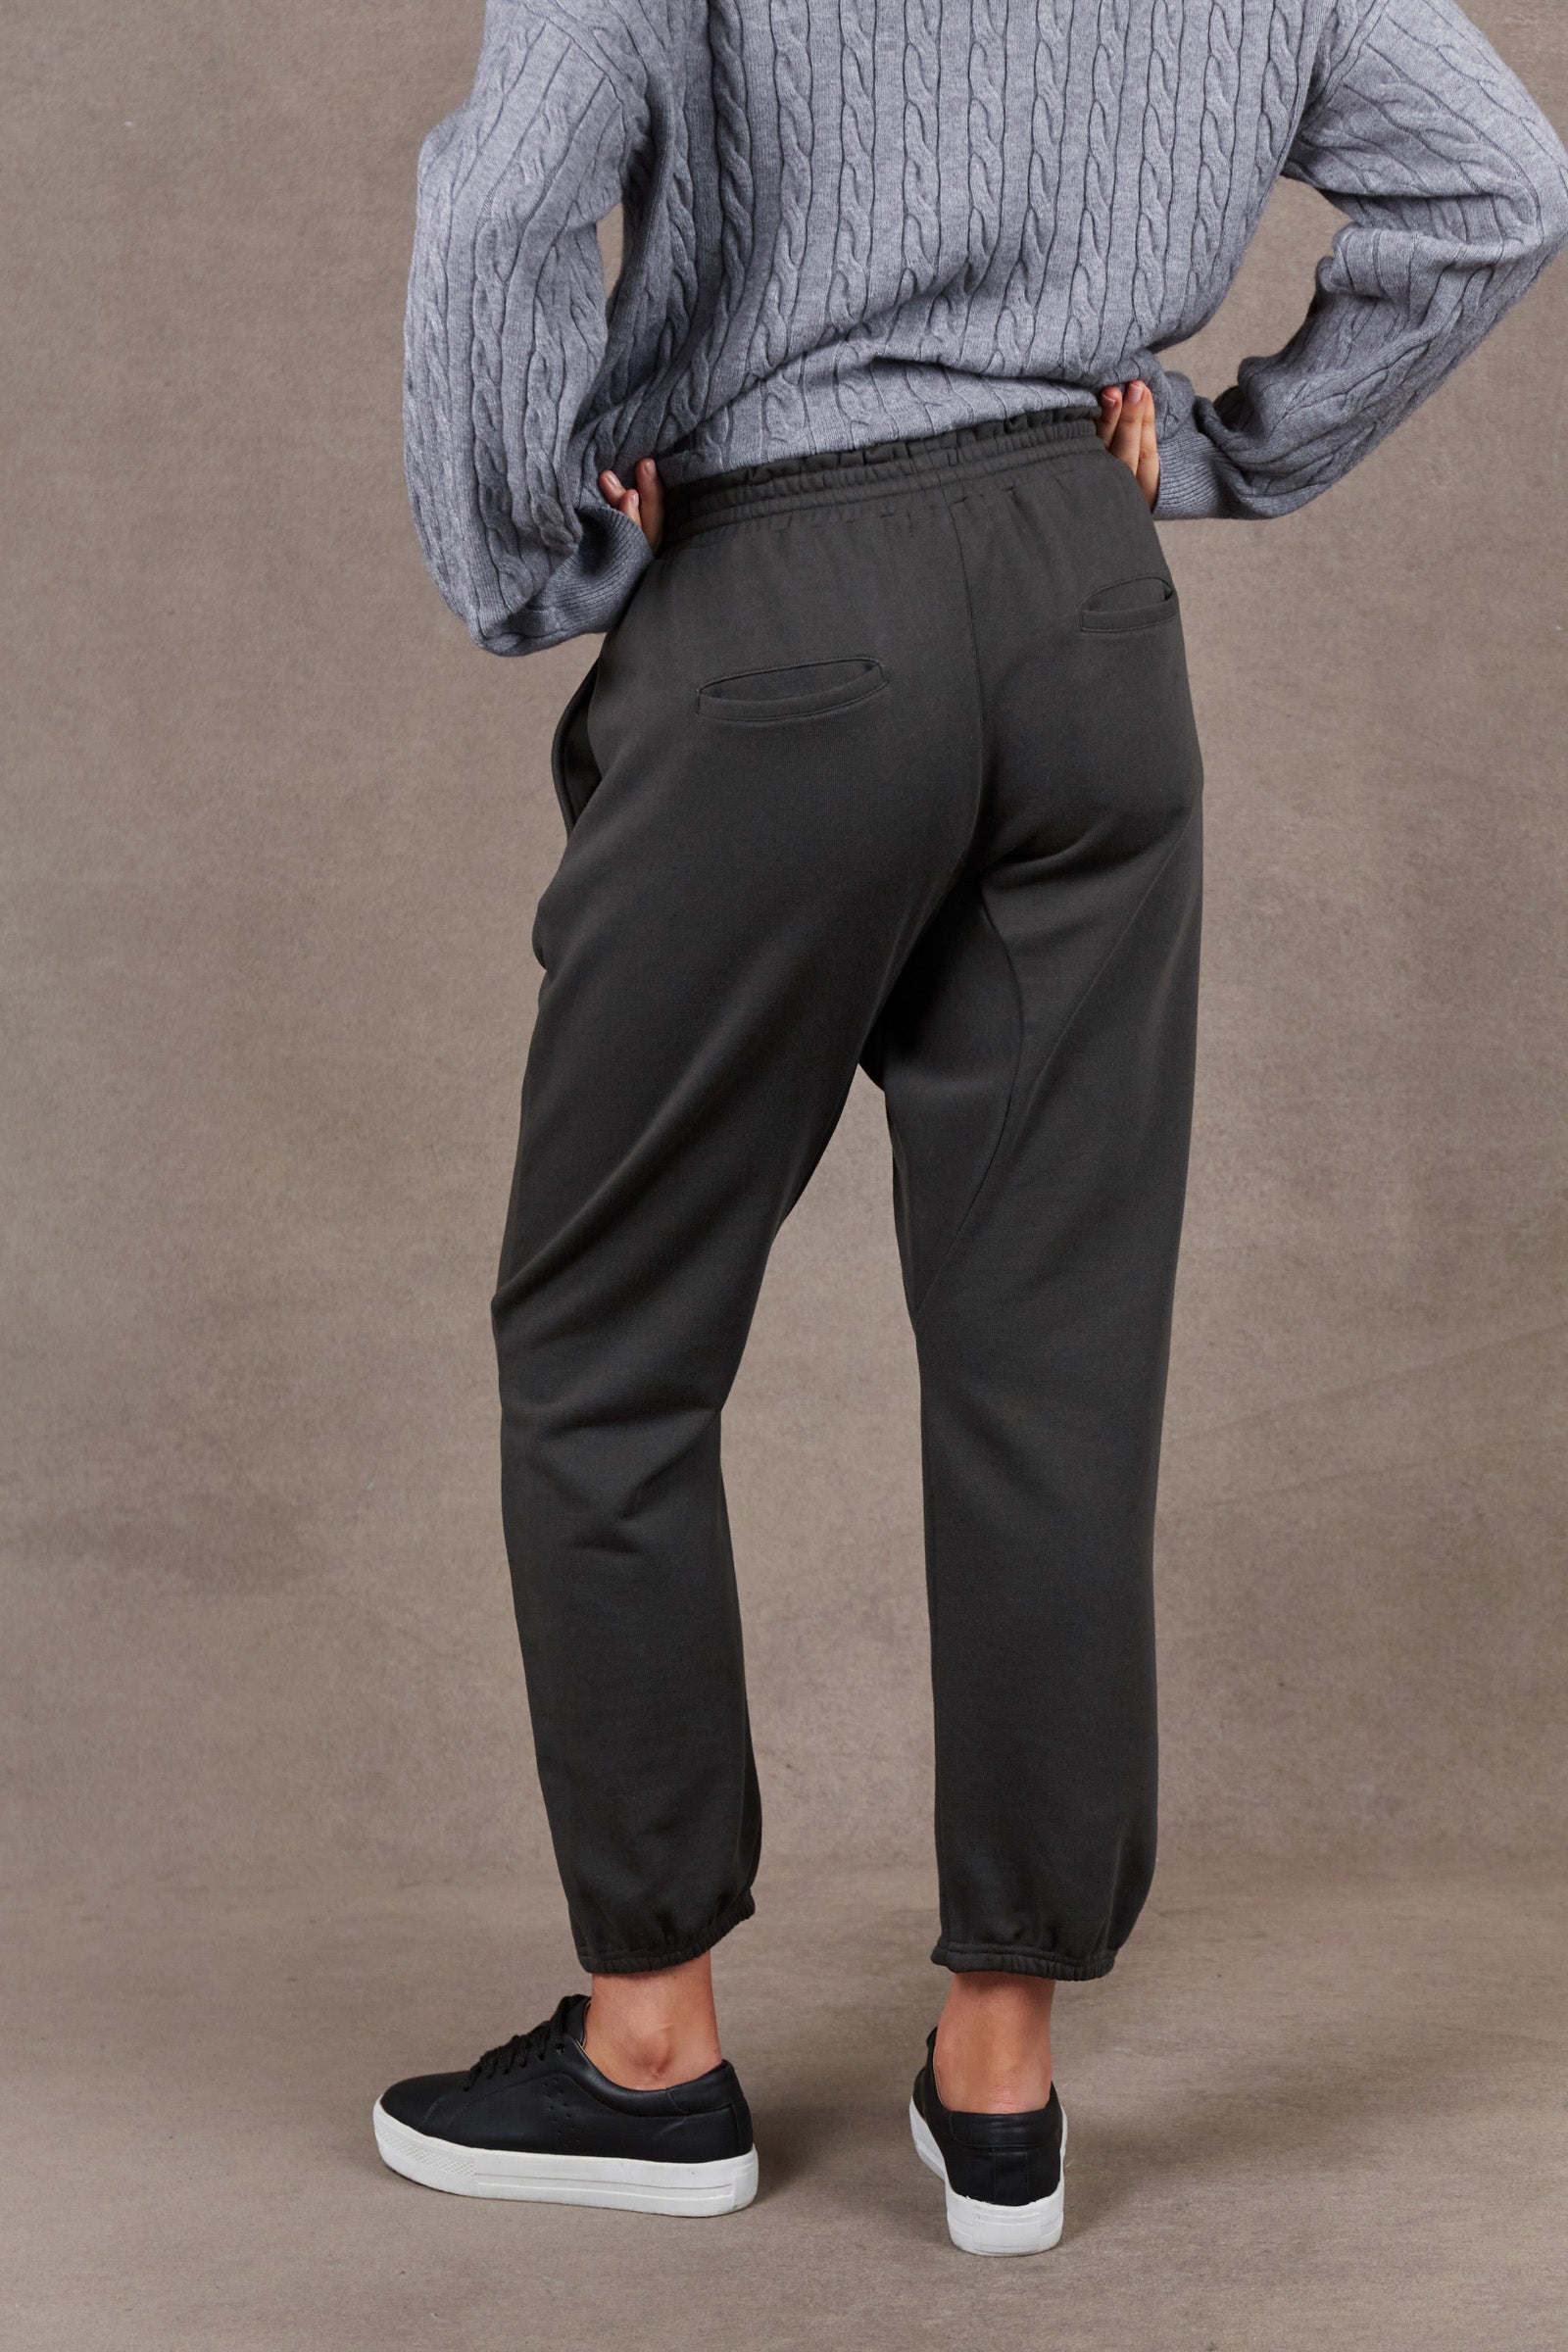 Est Pant - Graphite - eb&ive Clothing - Pant Relaxed Casual